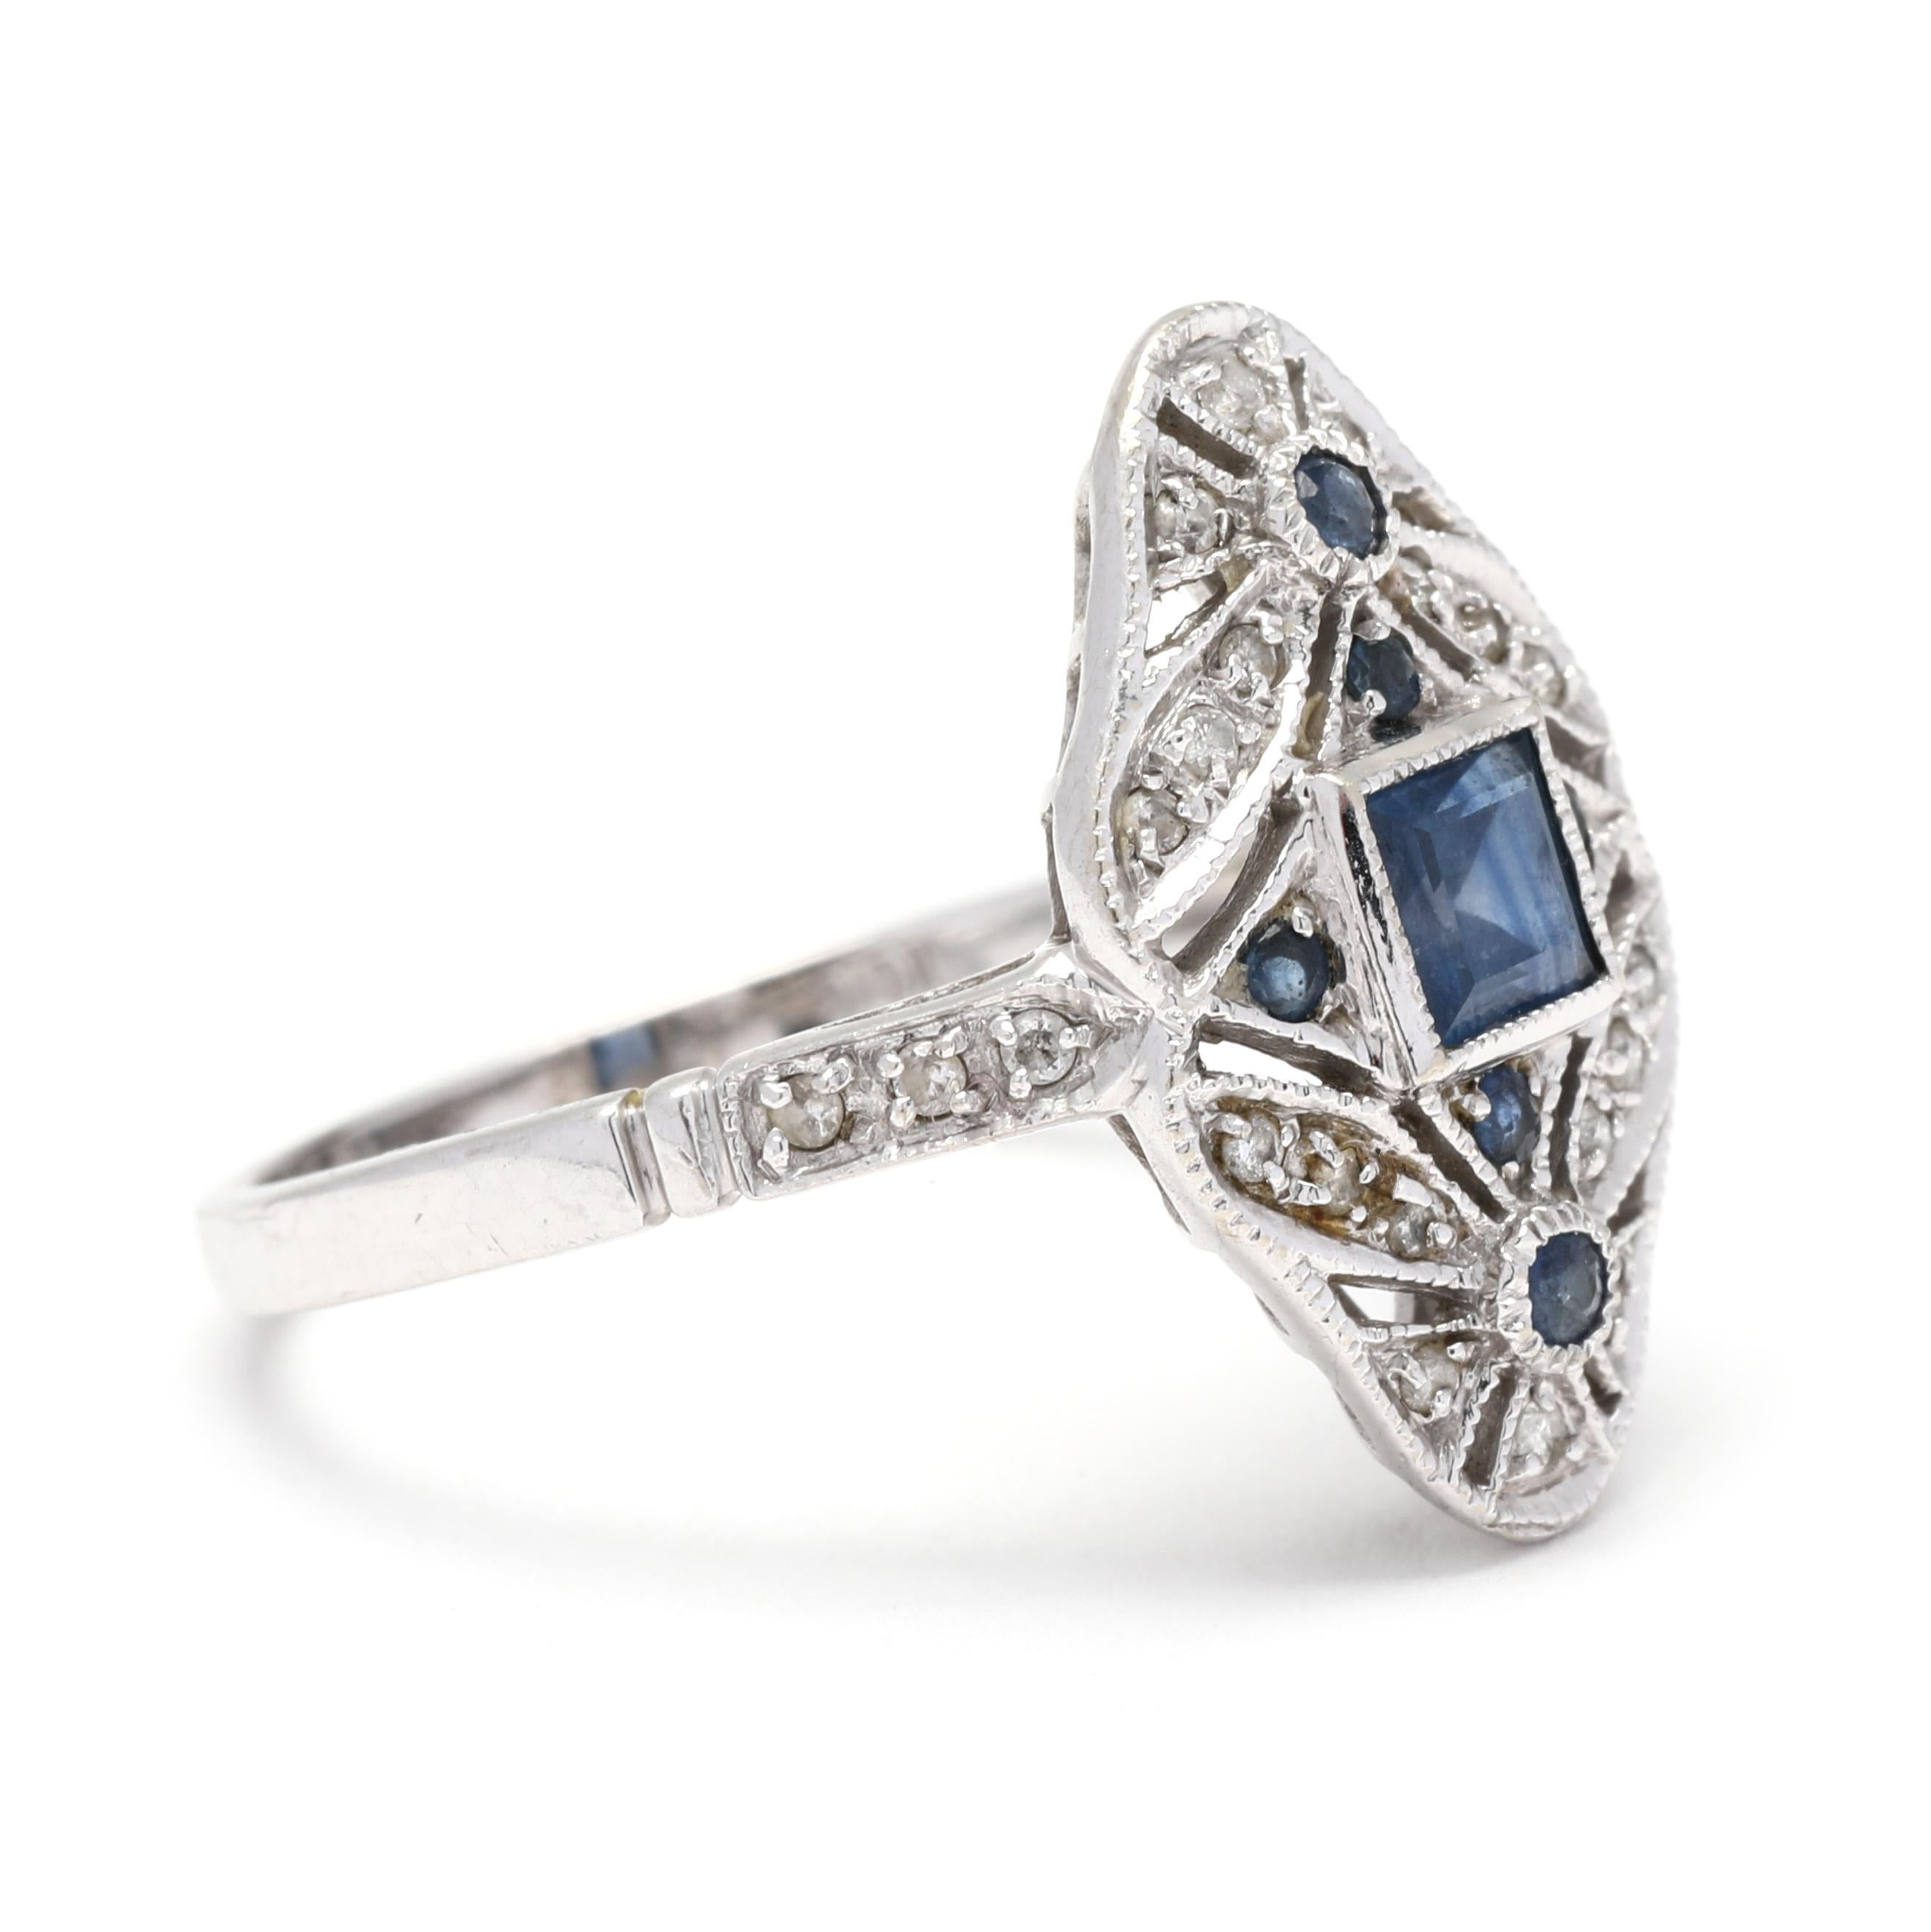 Add a touch of elegance to your collection with this stunning sapphire and diamond navette ring. Crafted in 10K white gold, this ring features a total weight of 0.72ctw sapphires and diamonds. The navette shape of the ring adds a unique and